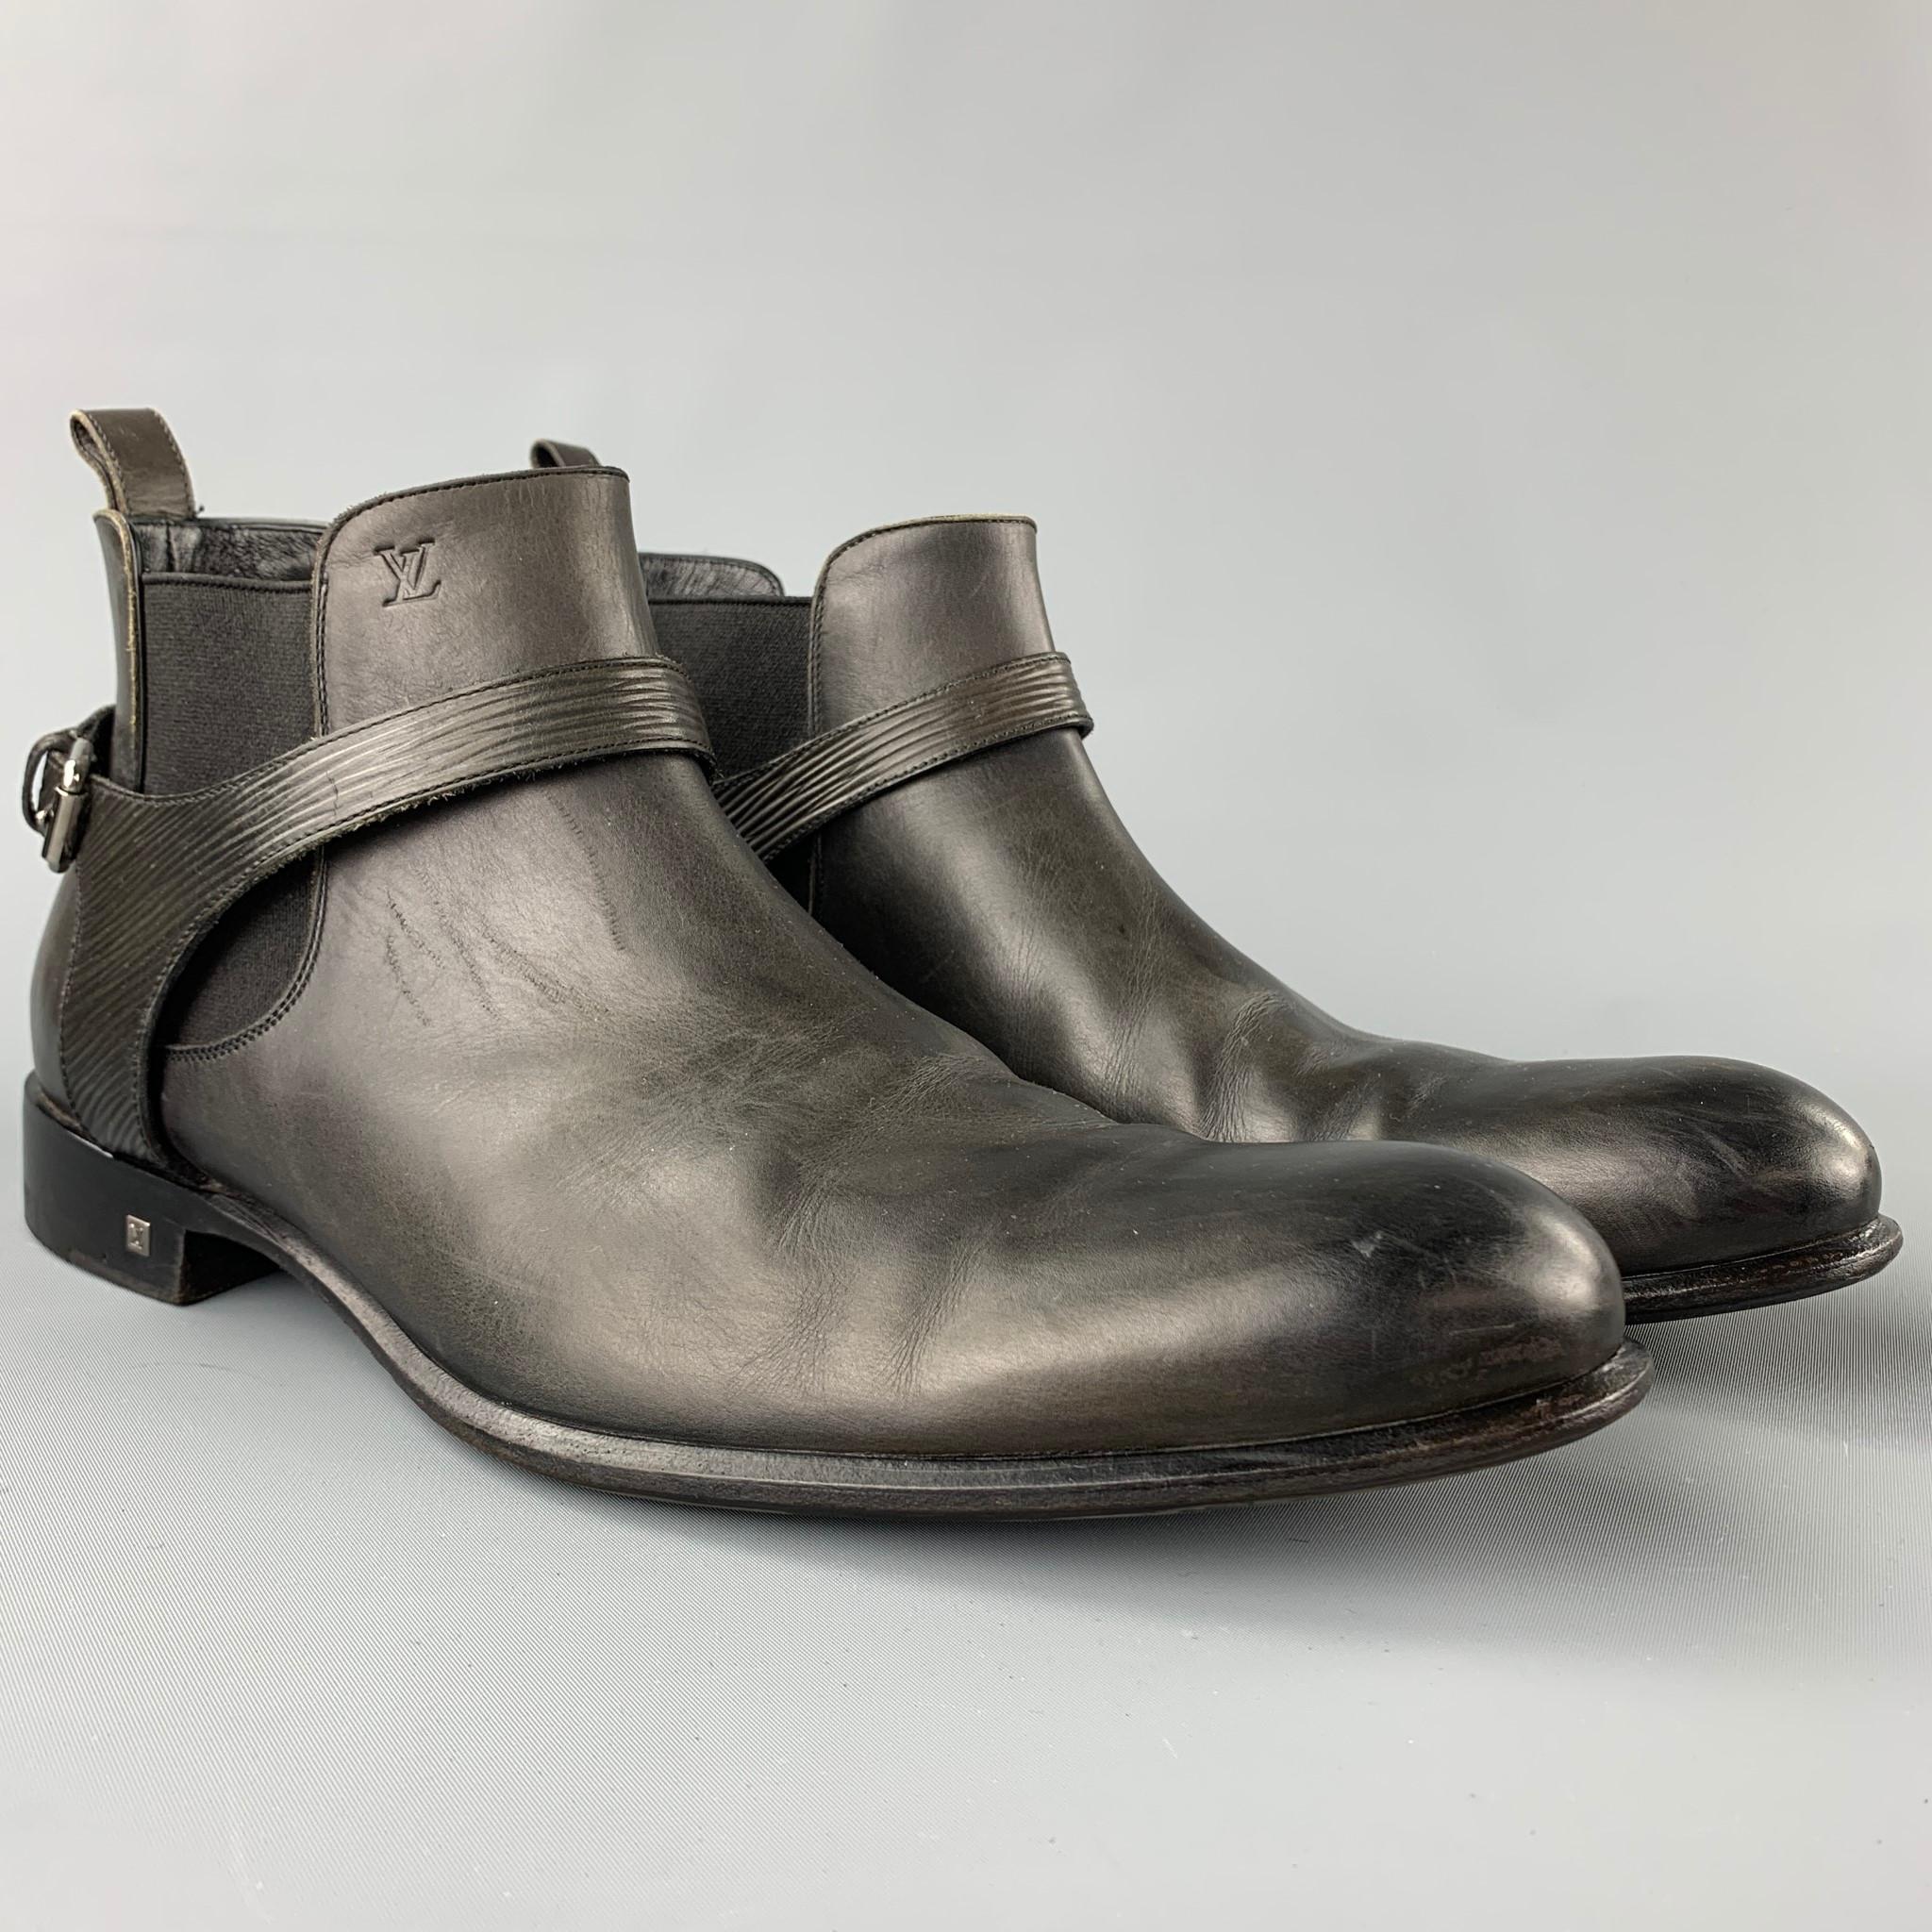 LOUIS VUITTON boots comes in a slate antique leather featuring a harness design, silver tone hardware, cap toe, and a wooden sole. Made in Italy.

Very Good Pre-Owned Condition.
Marked: EU 11


Measurements:

Length: 13 in.
Width: 4 in.
Height: 4.5